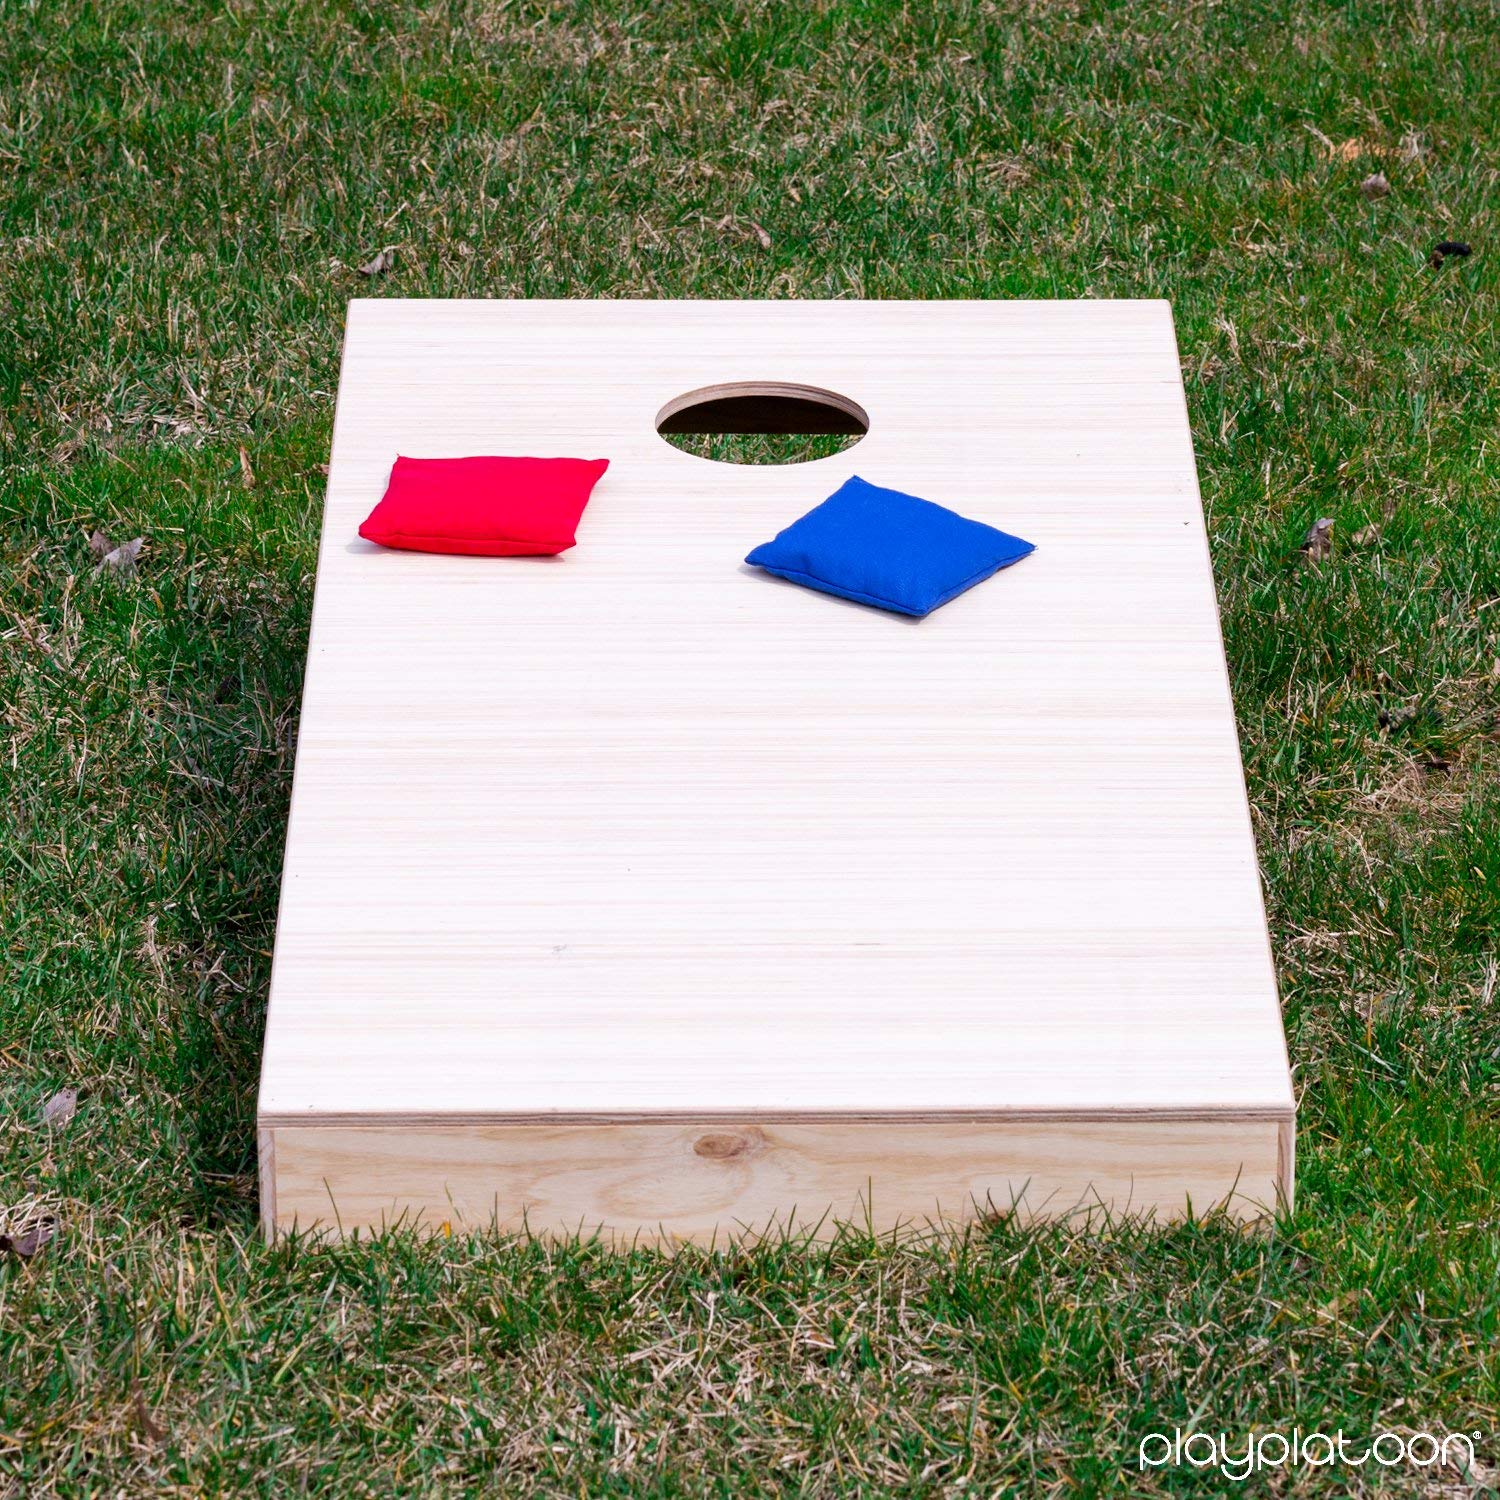 2 Designs to Choose from! 2 x 4 Ft Tournament Size Wood Corn Hole Board Game Play Platoon Regulation Wooden Cornhole Boards with Cornhole Bag Set